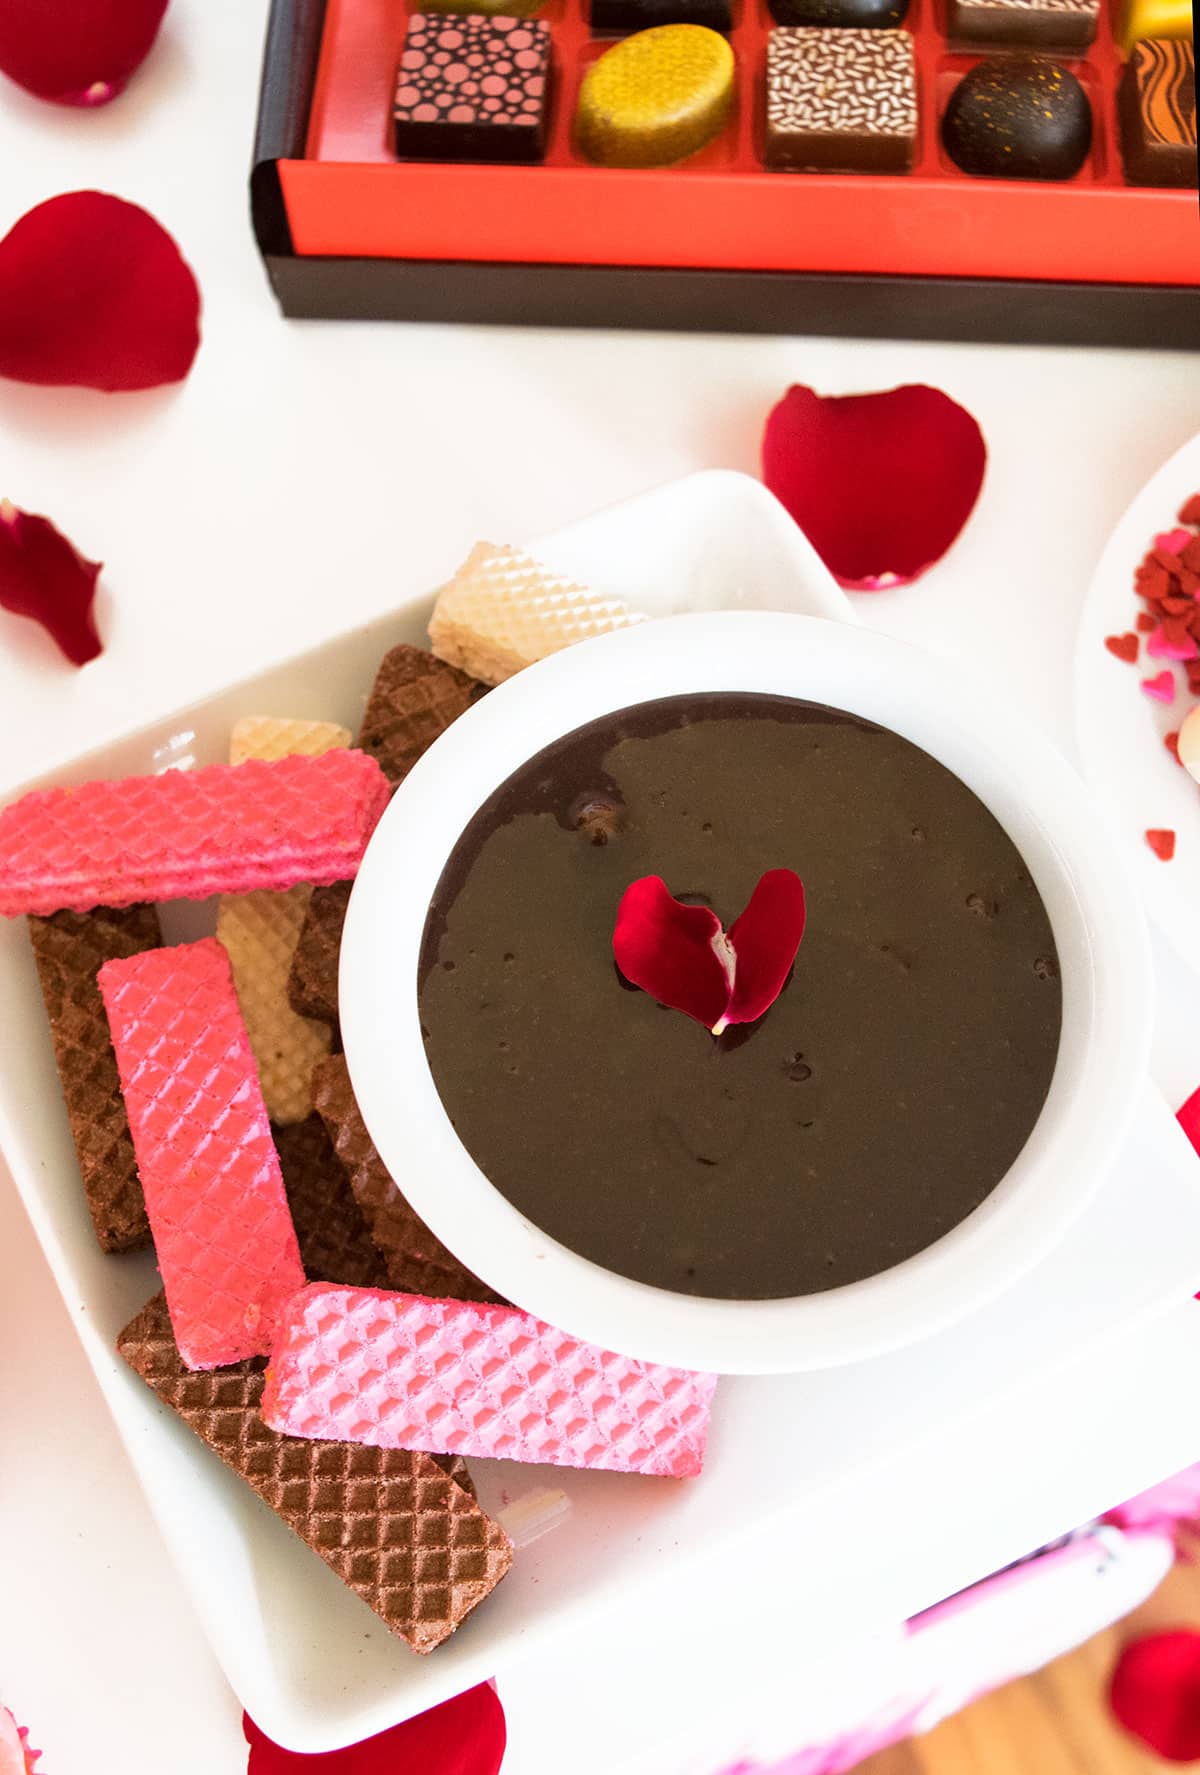 Chocolate Dip in White Bowl With Rose Petals and Wafers.